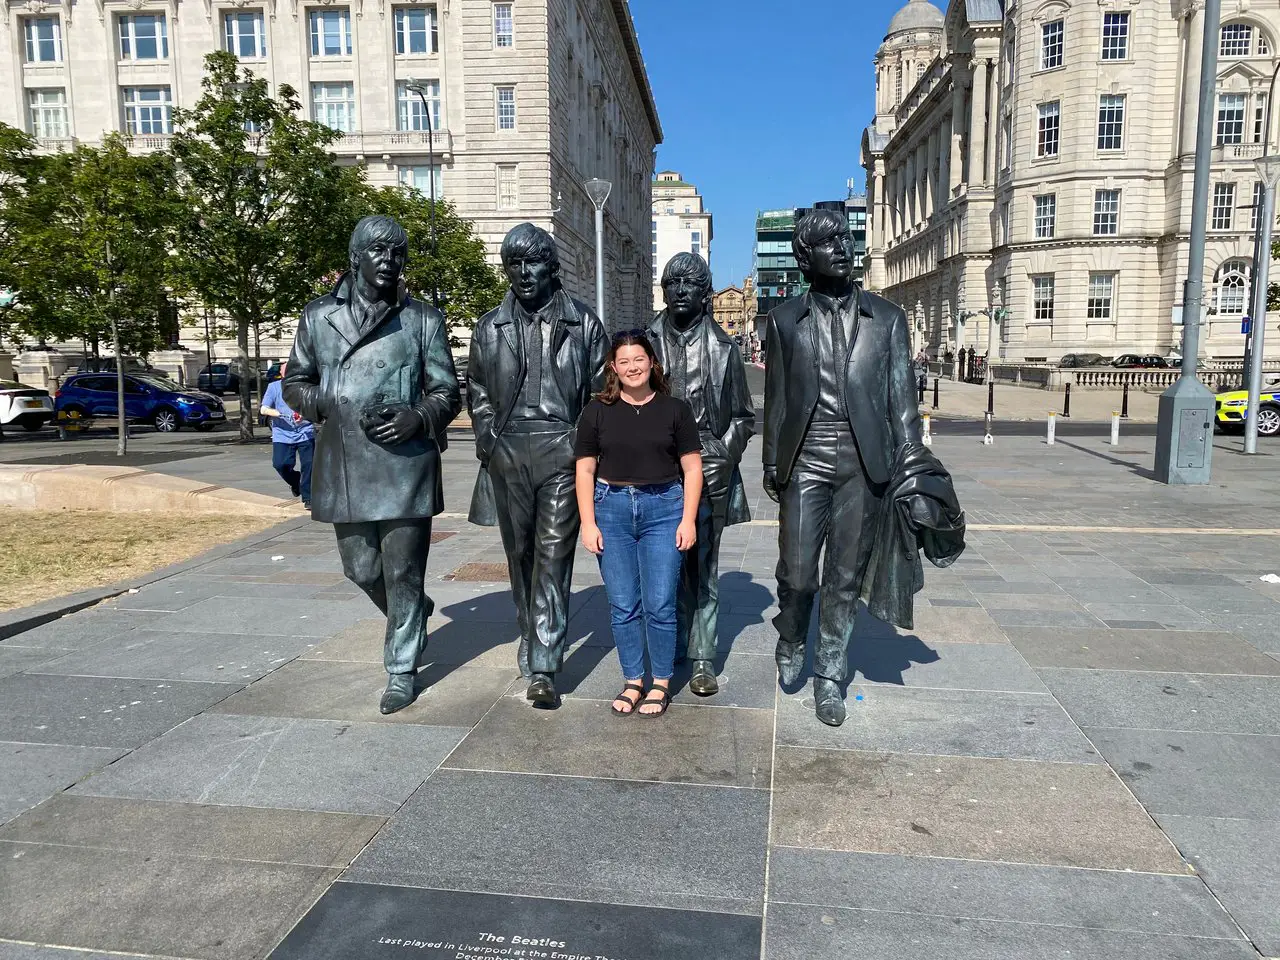 Ella, wearing blue jeans and a black top, posing with the Beatles sculpture in Liverpool. Liverpool is worth visiting for Beatles fans!